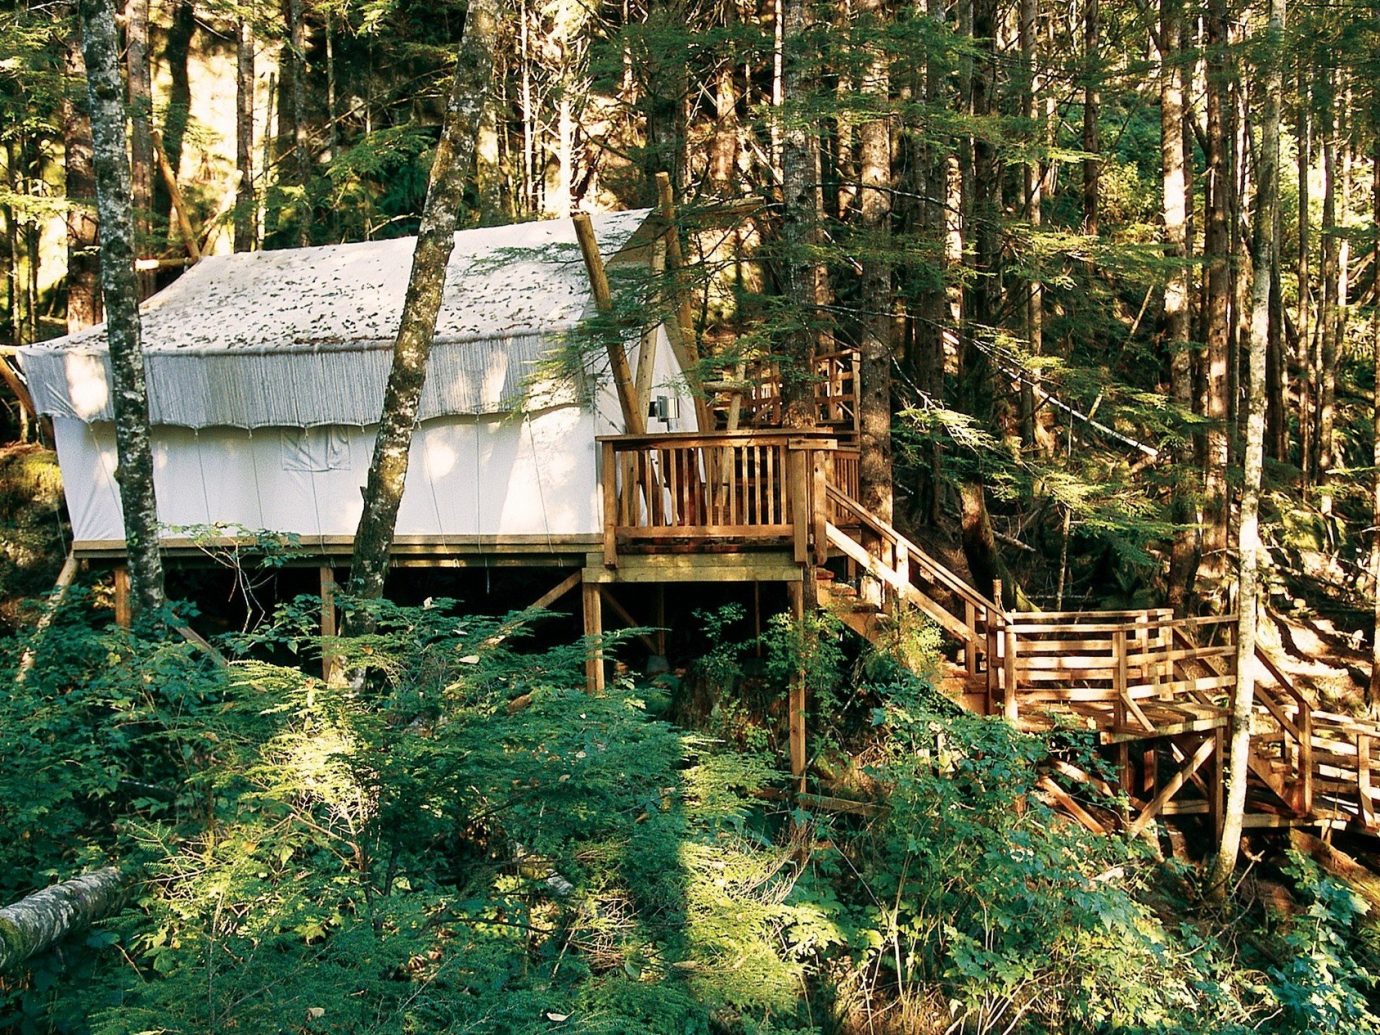 Glamping Hotels Outdoors + Adventure Weekend Getaways tree outdoor habitat grass wooden wilderness natural environment Forest ecosystem woodland wood Jungle rural area rainforest hut log cabin wooded surrounded